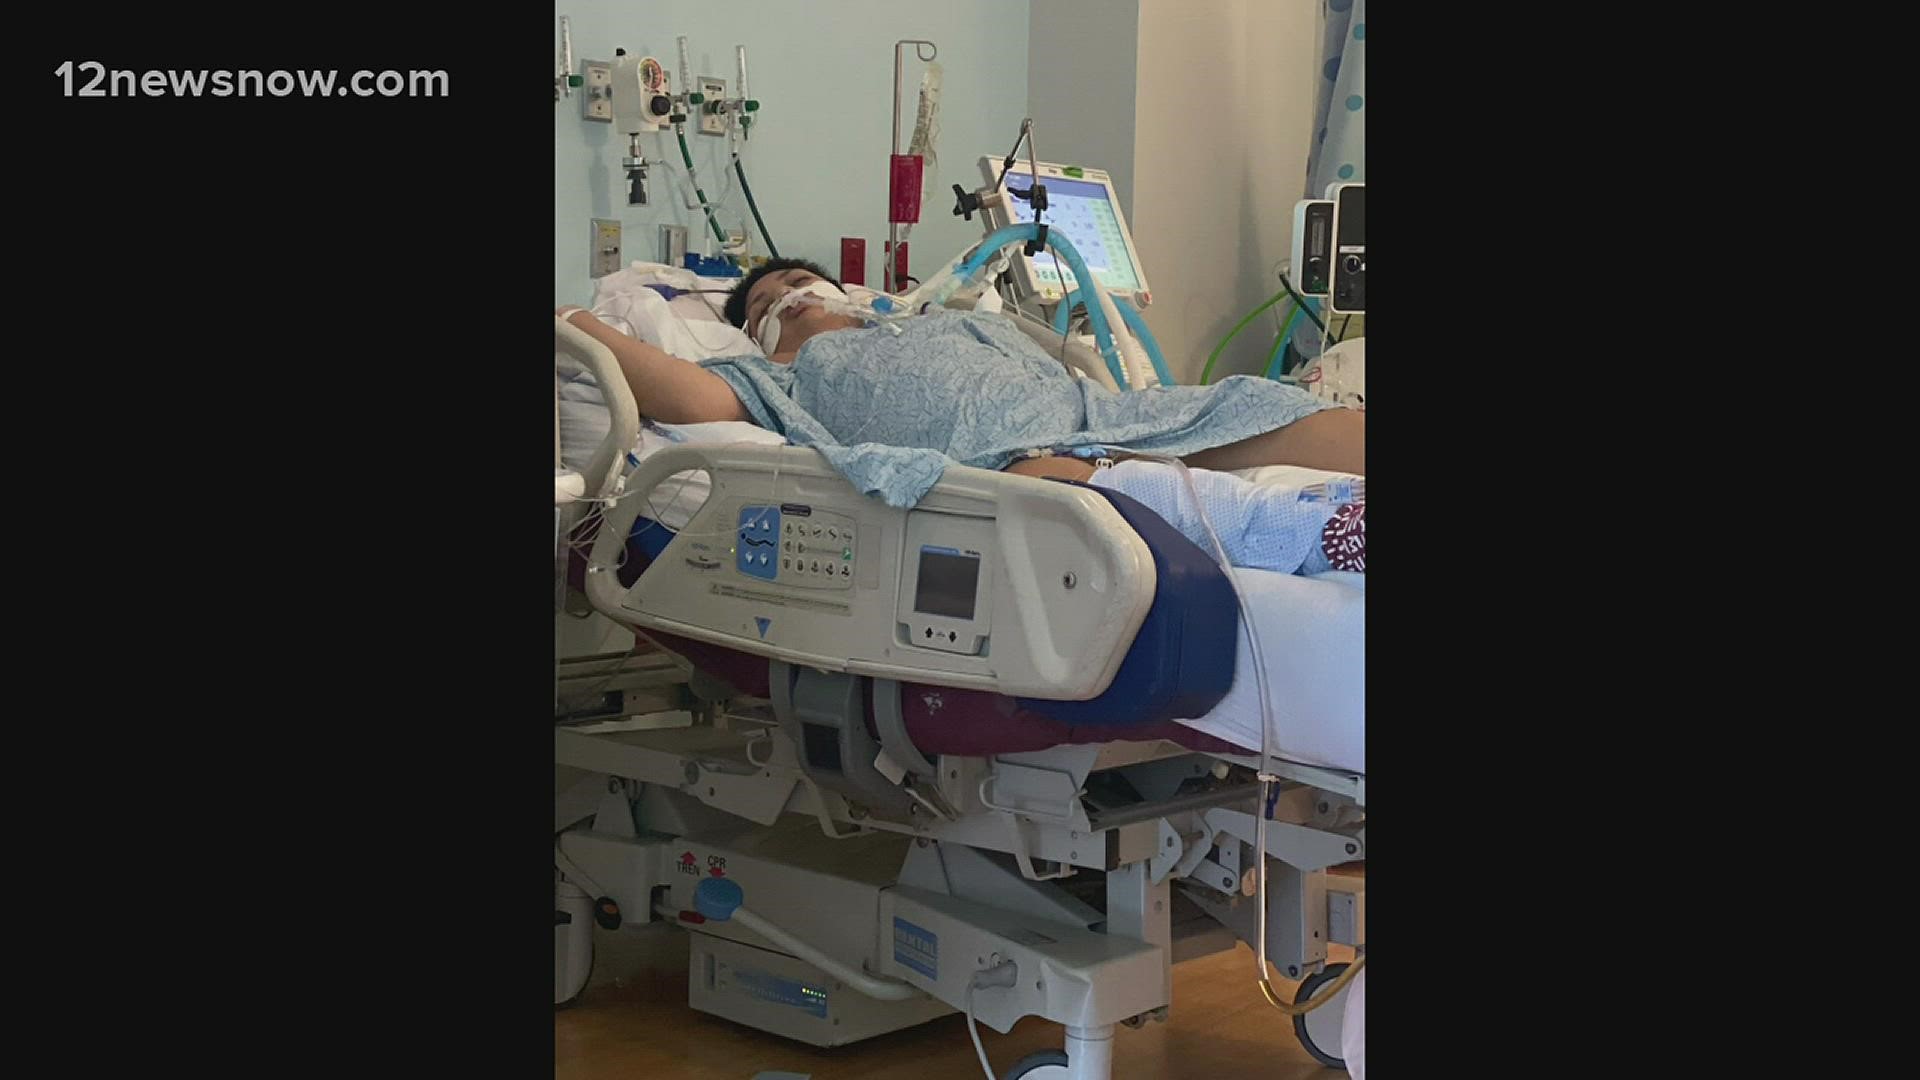 A 12-year old Nederland boy is battling a rare illness associated with COVID called, MIS-C. Now he's at Texas Children's hospital in a coma.